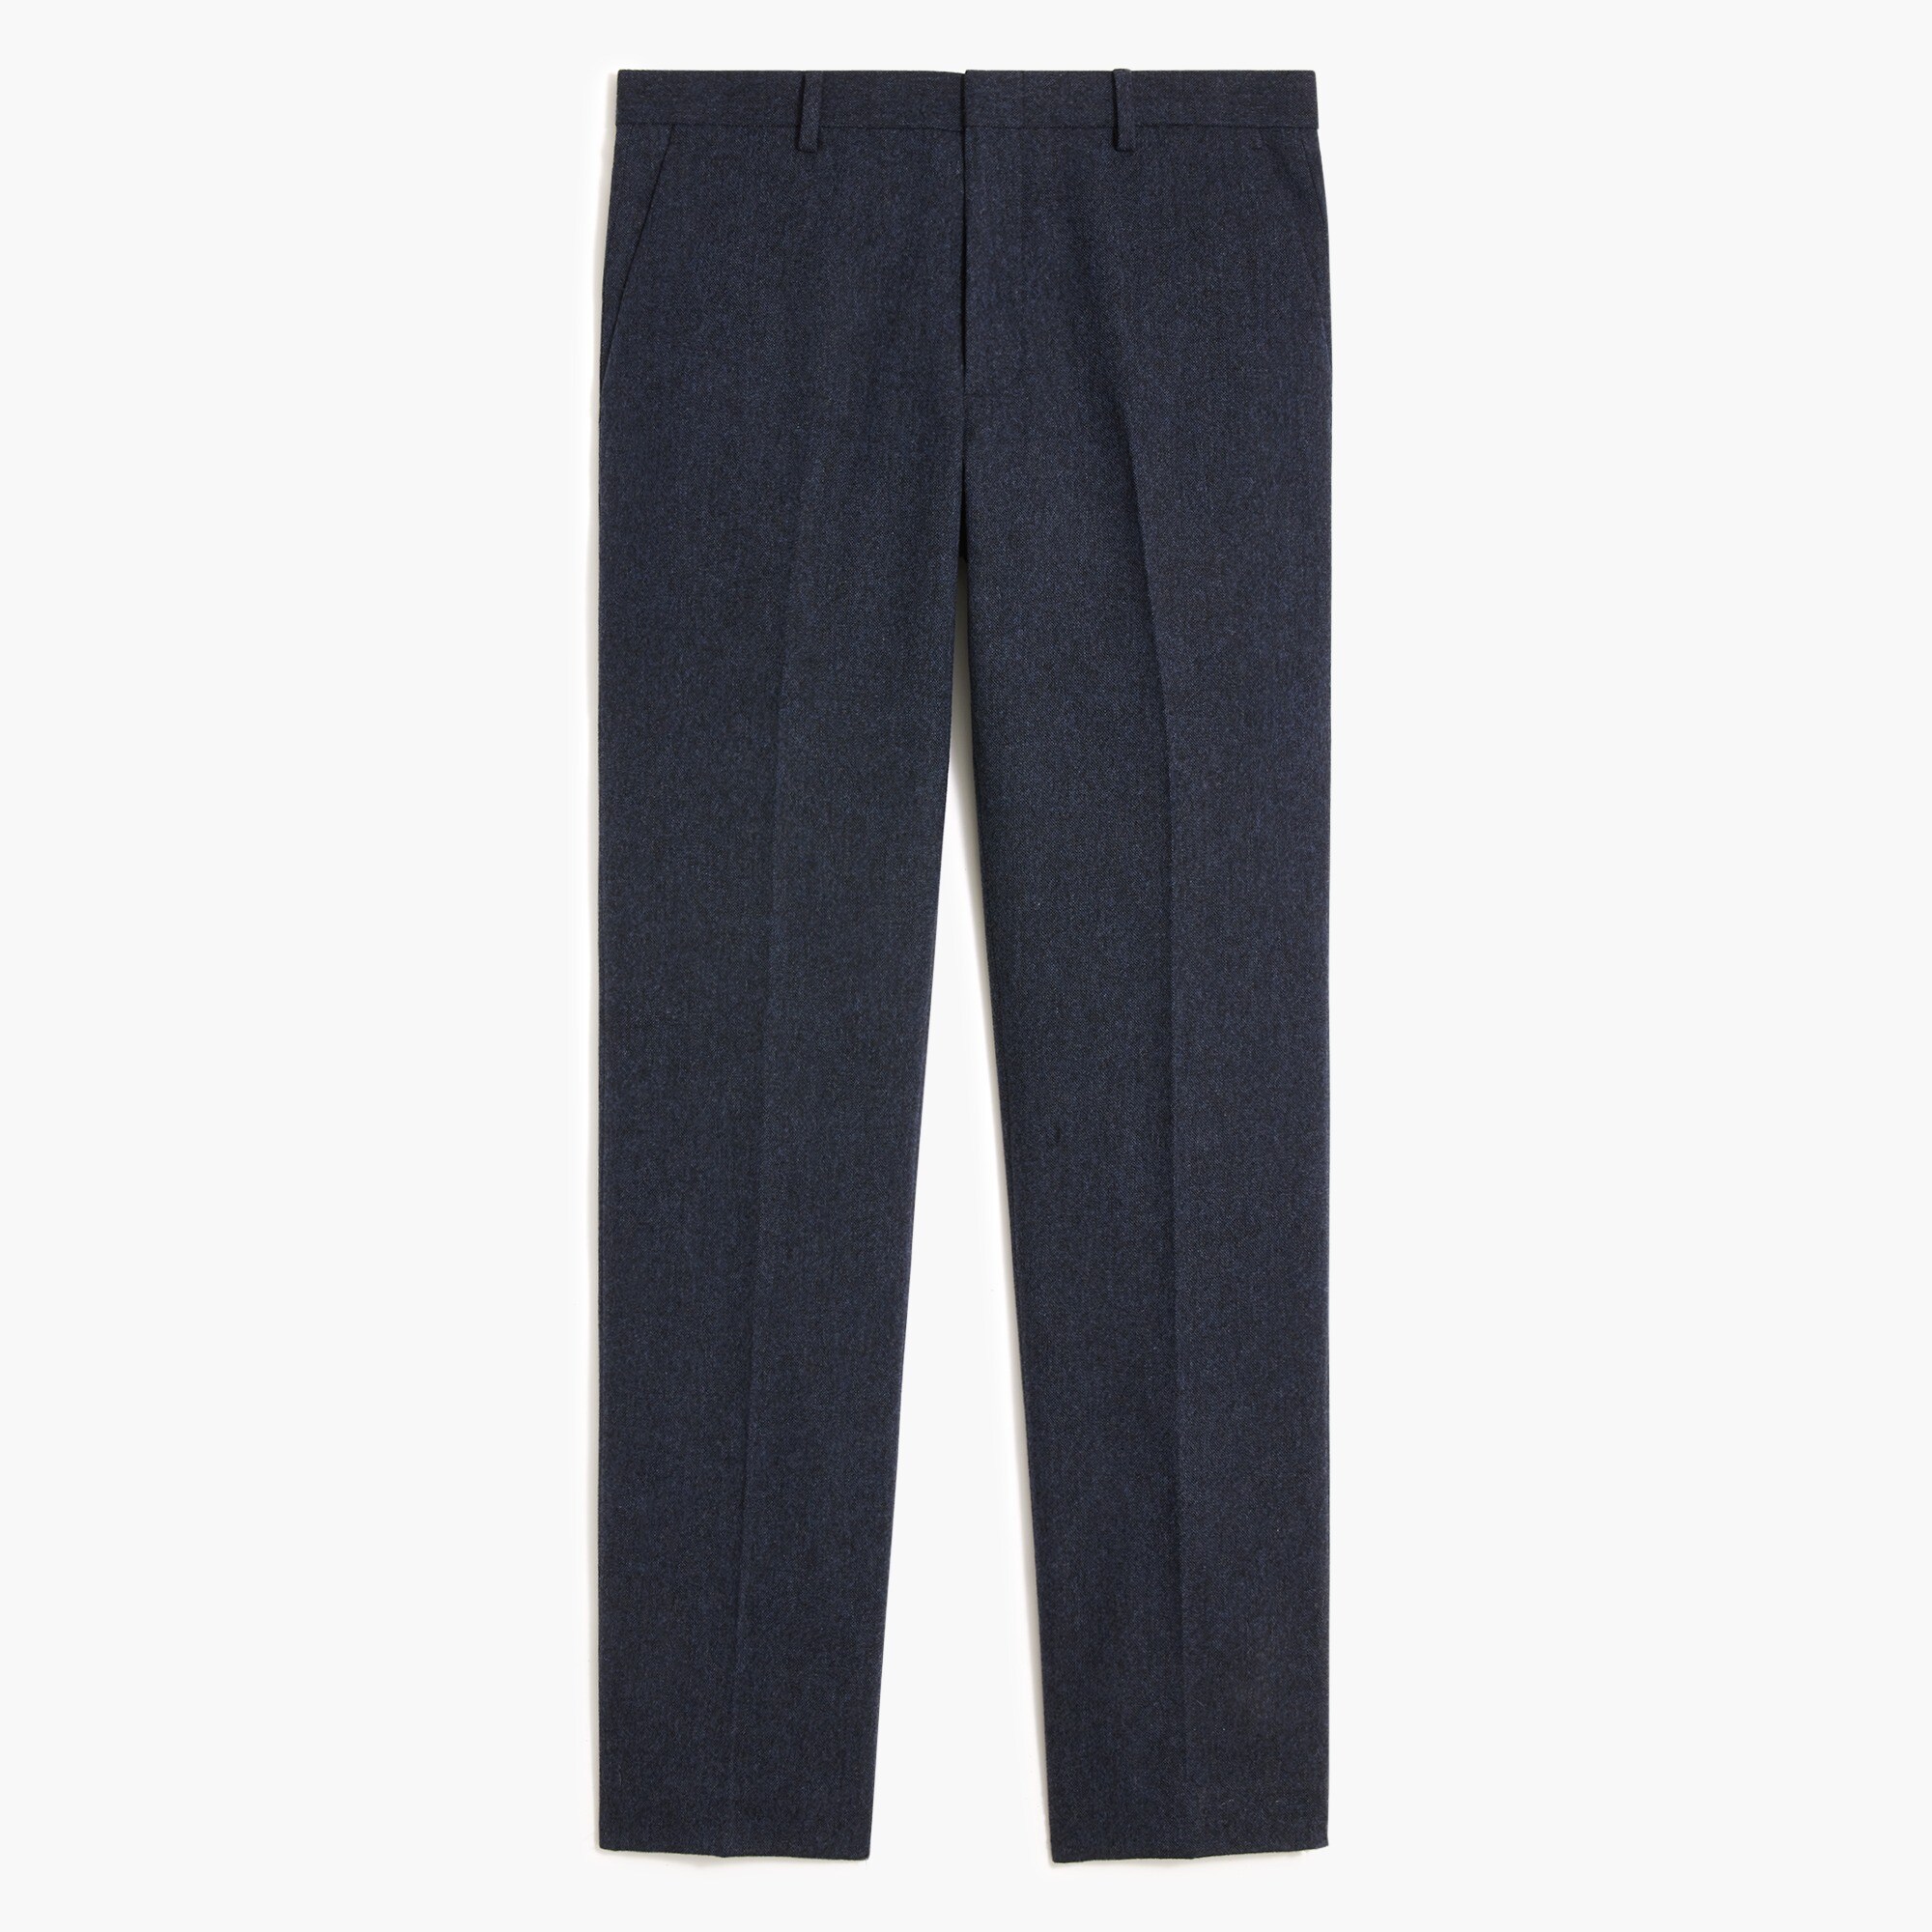  Slim-fit Thompson suit pant in Donegal wool blend